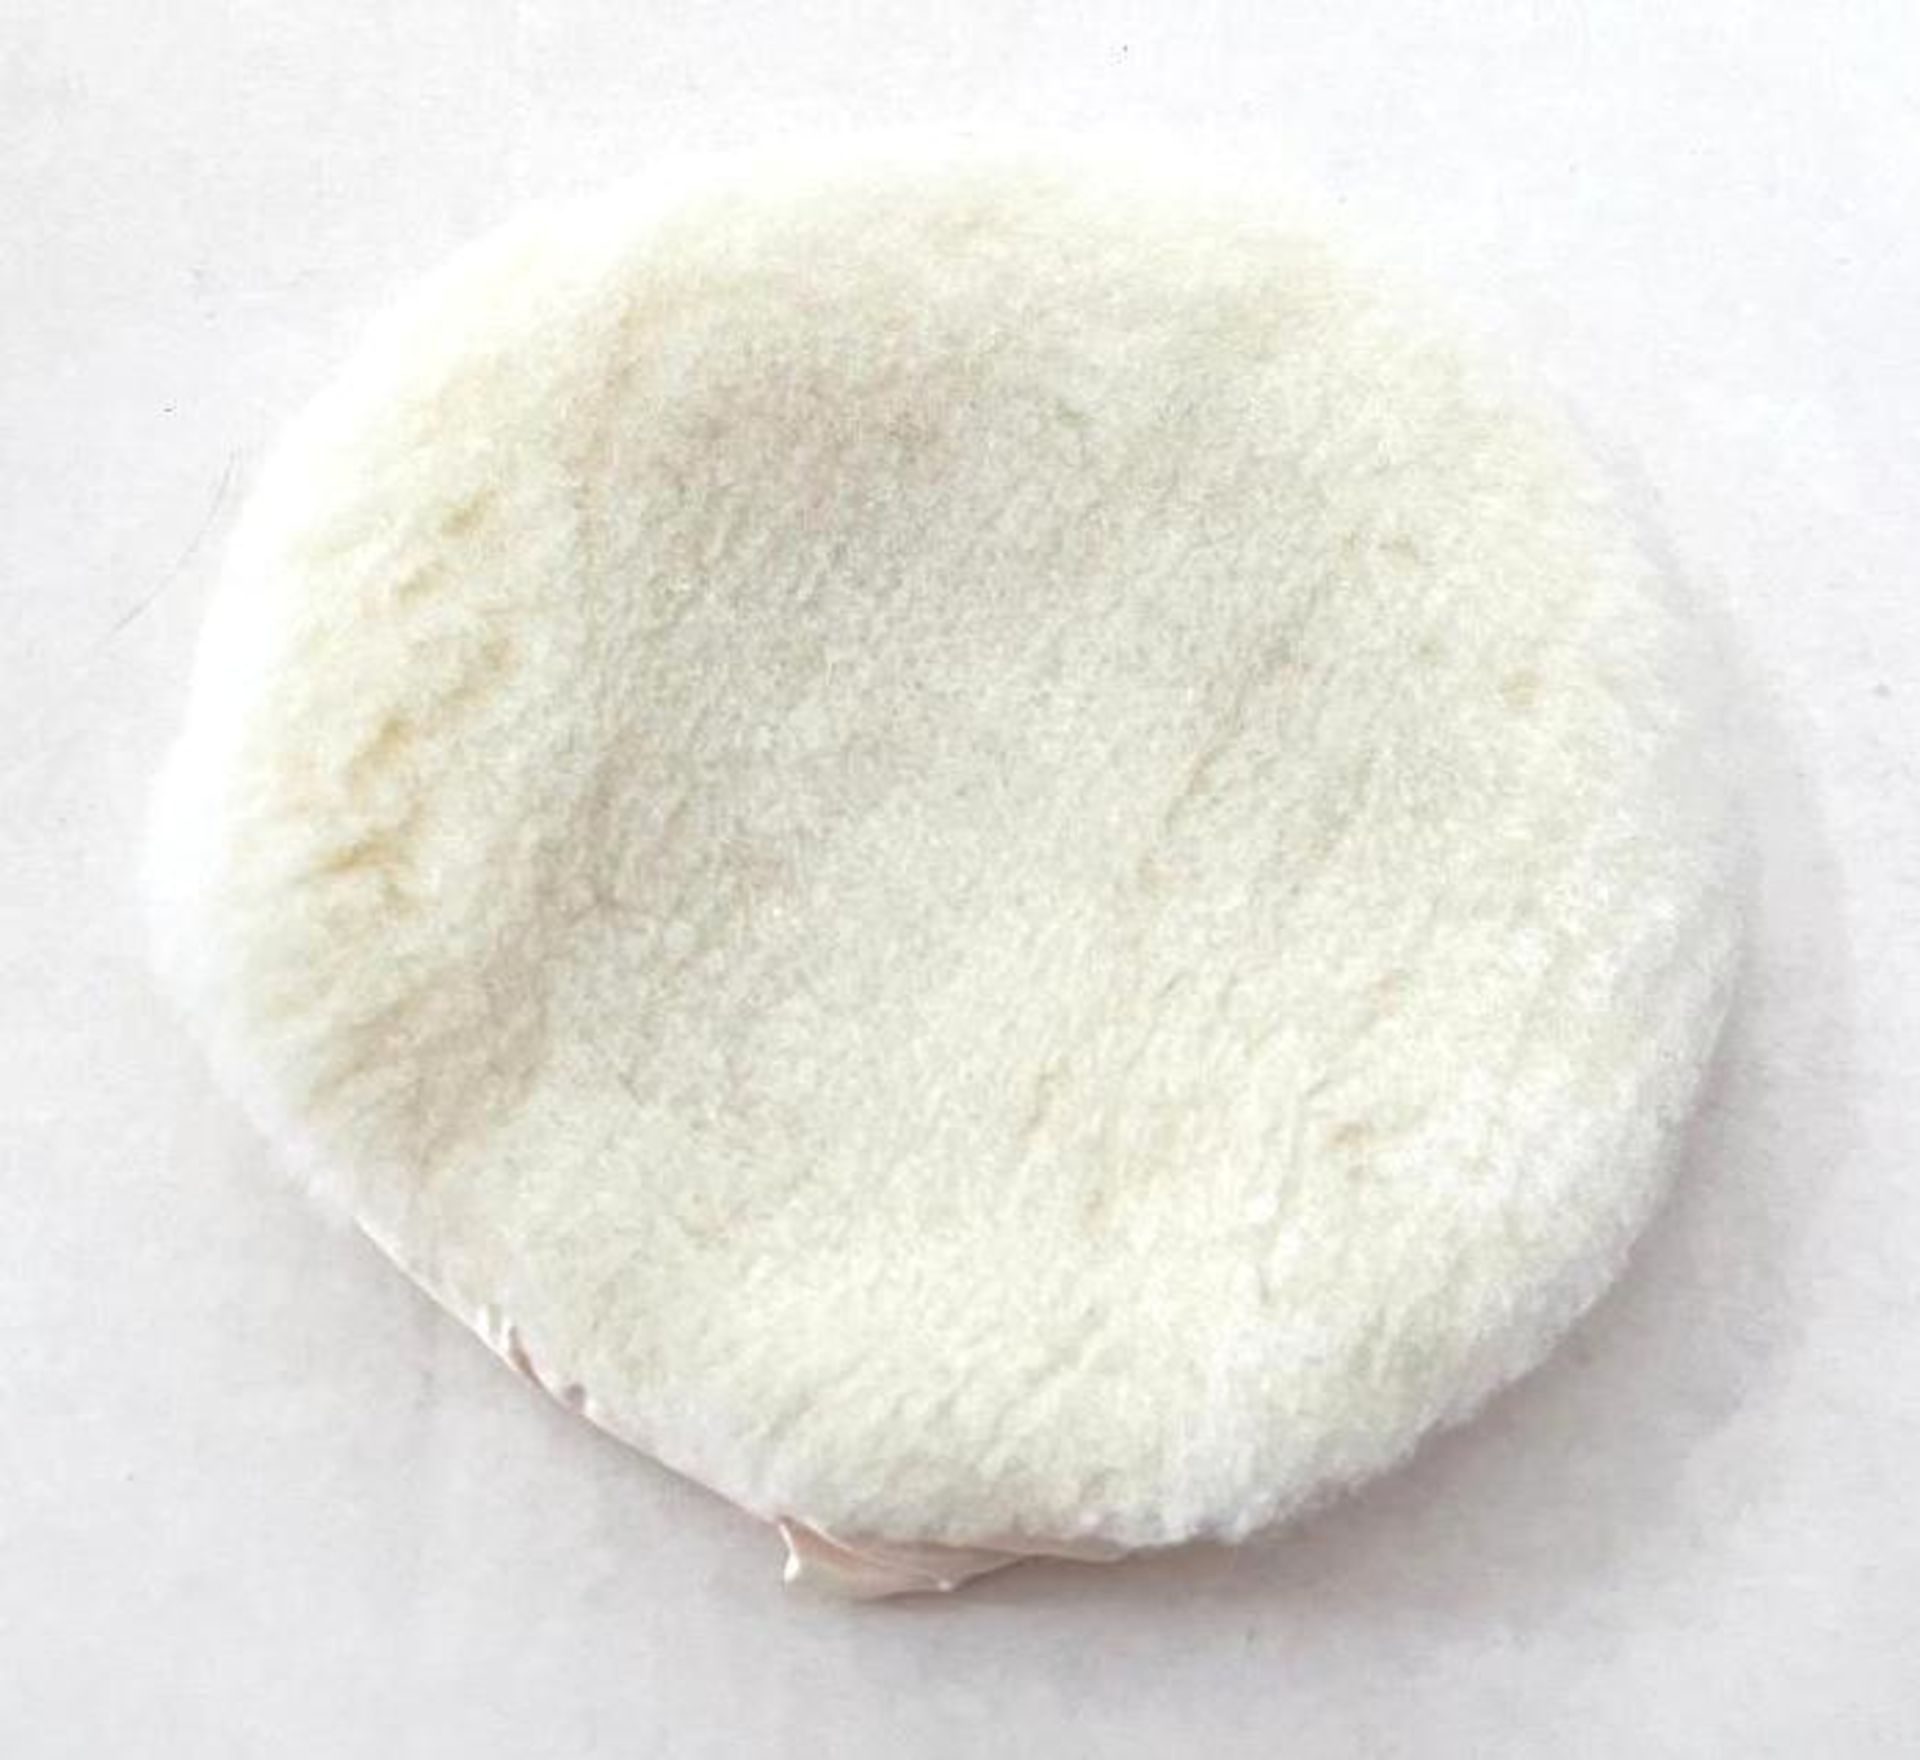 500CT 7" WOOL BLEND POLISHING BONNETS WITH DRAW STRING BRAND/MODEL EAZYPOWER 87183 ADDITIONAL INFO T